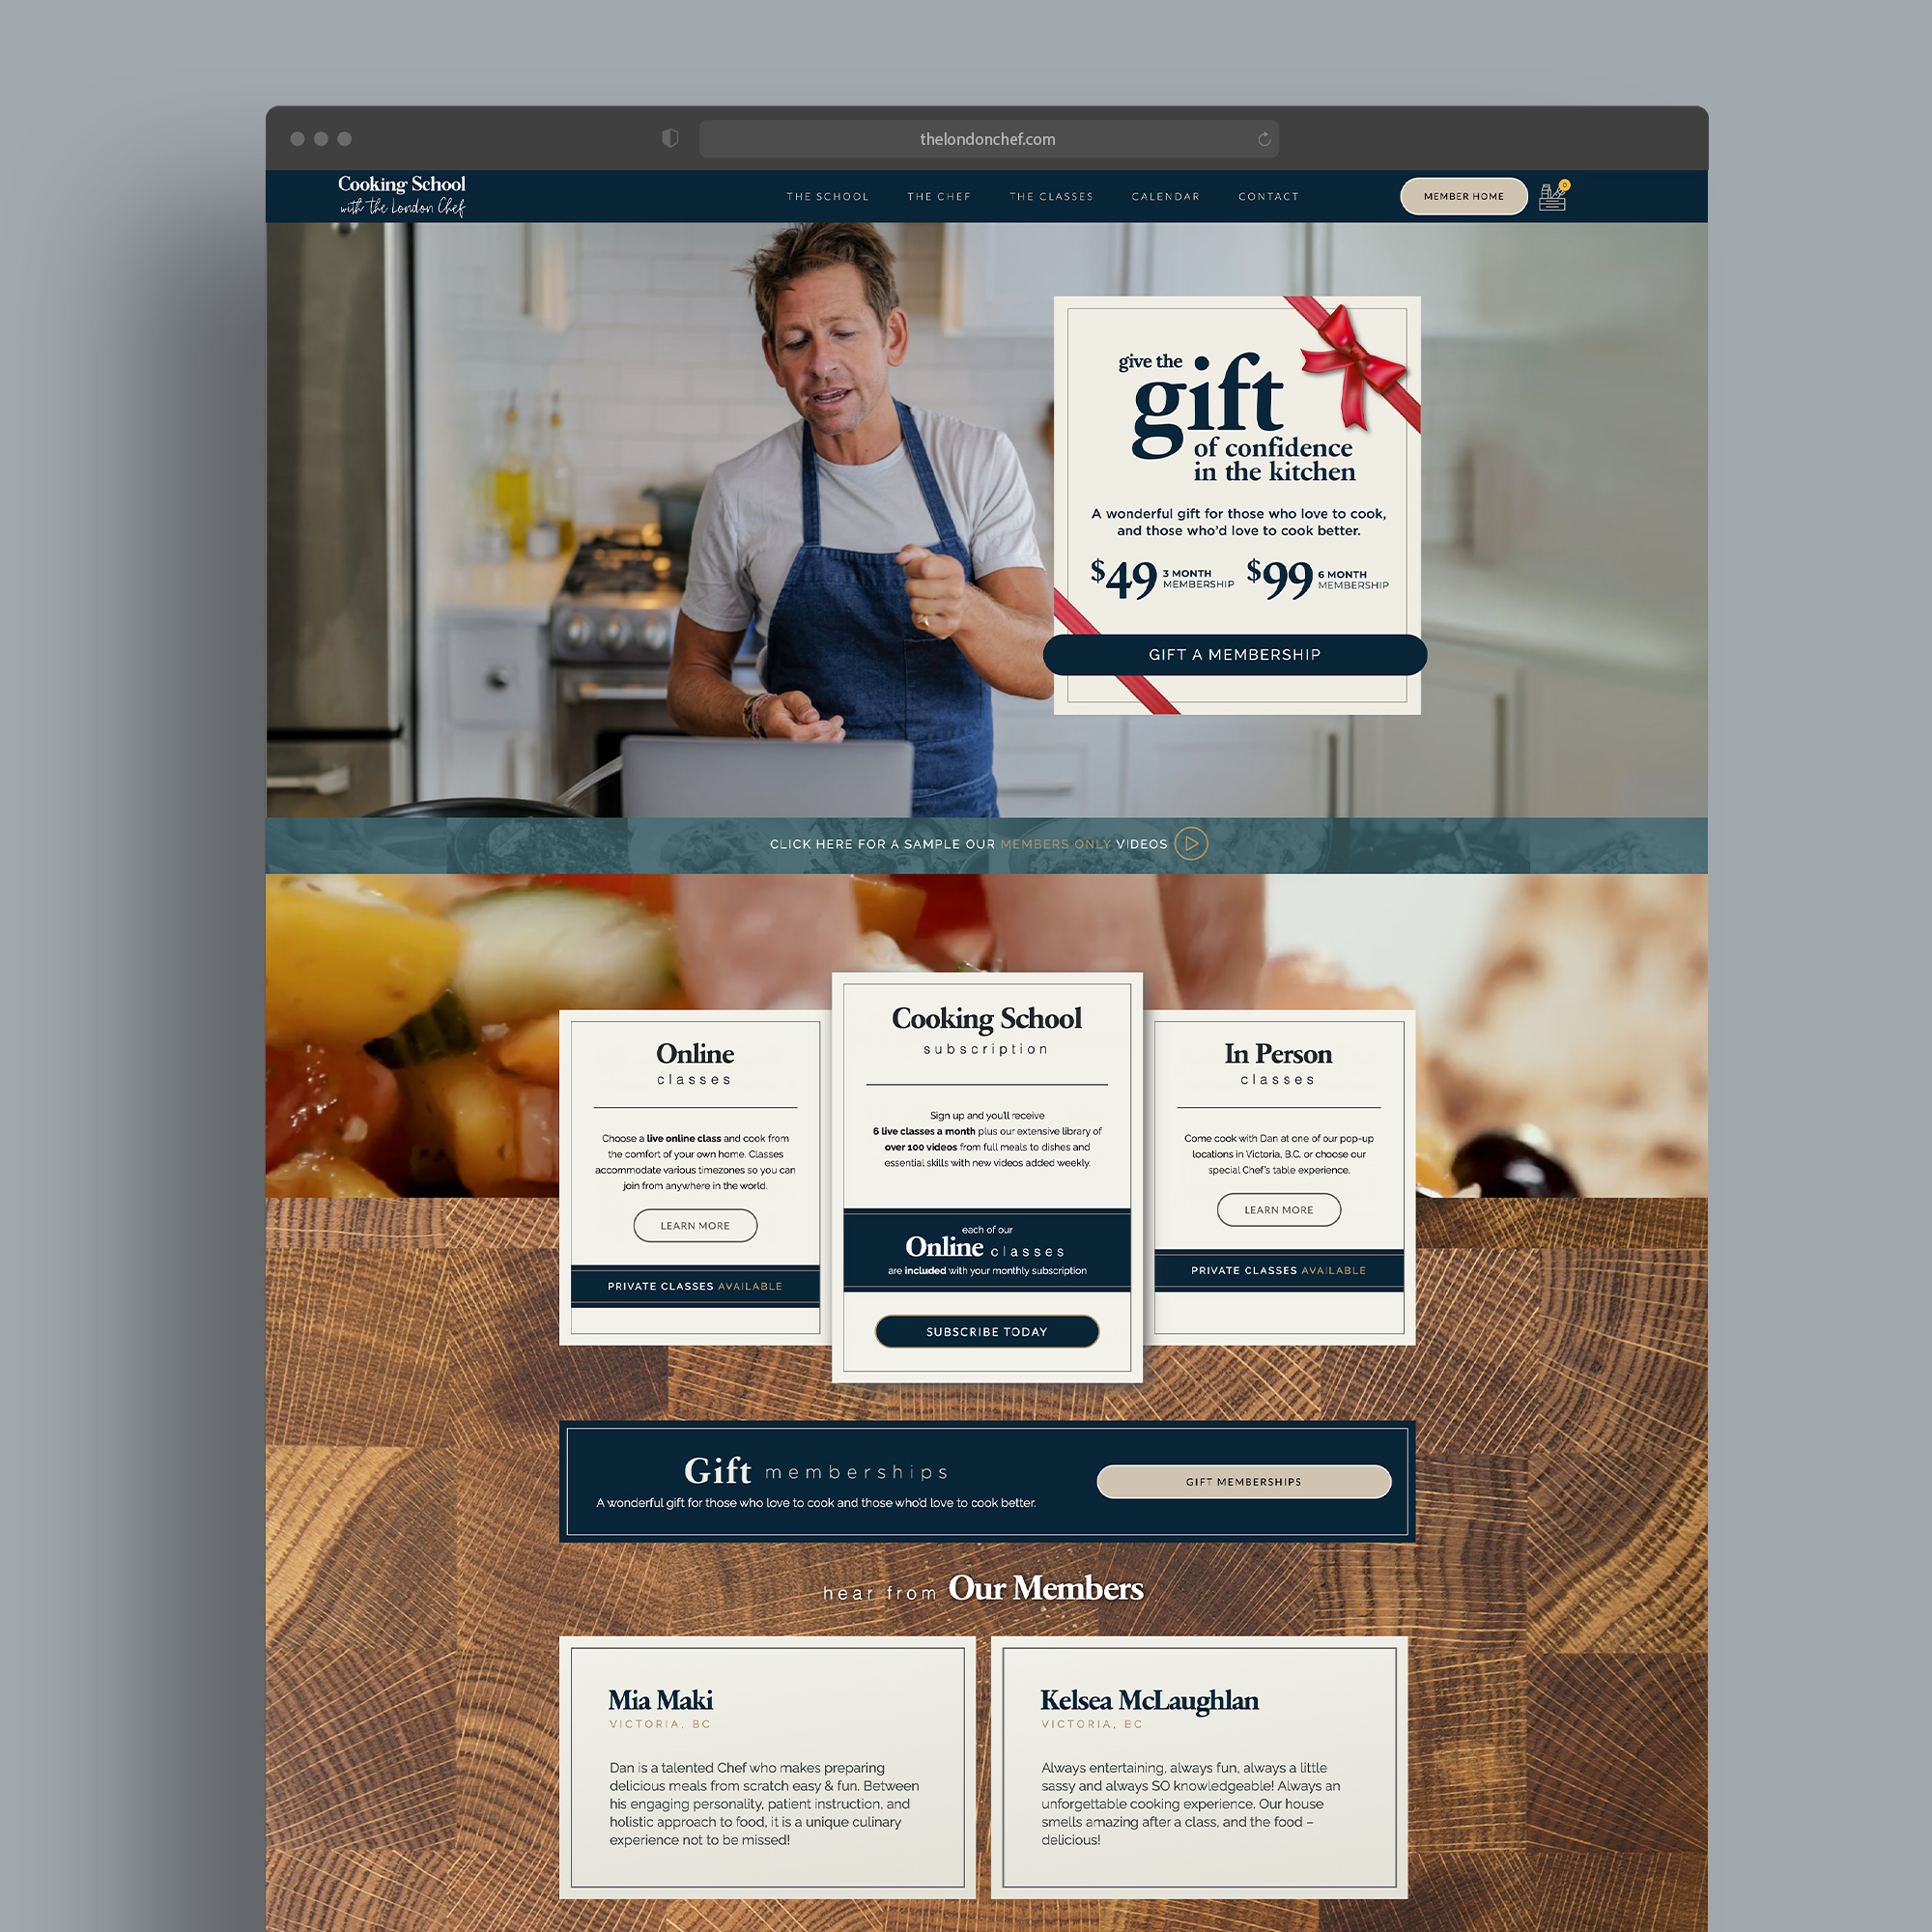 CaseStudy CookingSchool WebMockup 01 - About Us